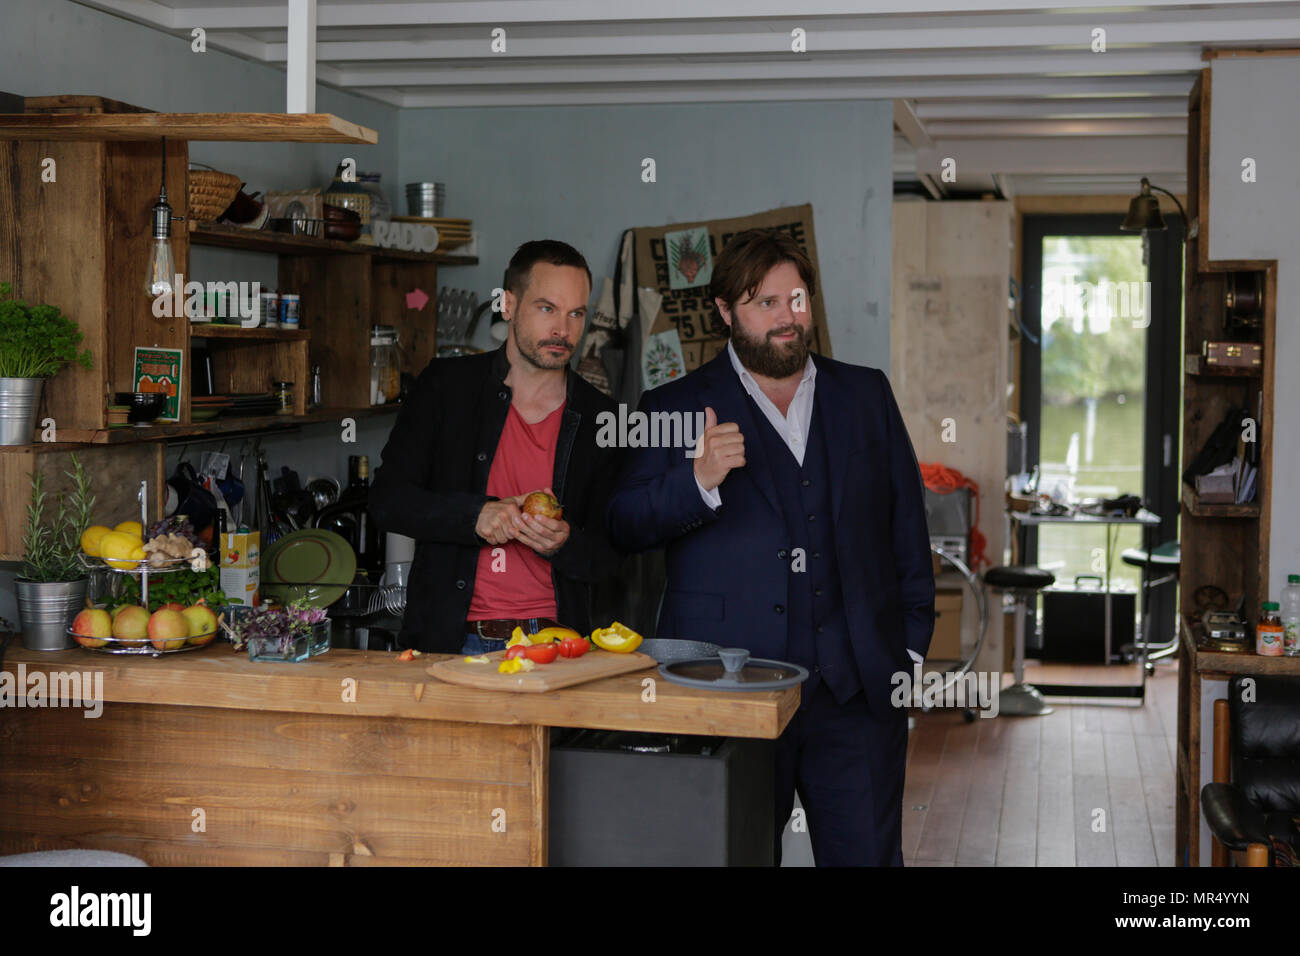 Actors Wanja Mues (left) an (Antoine Monot, Jr. (right) pose in the kitchen of  the houseboat that is owned by Mues' character Leo in the TV show preparing food. 4 new episodes of the relaunch of the long running TV series 'Ein Fall fuer zwei’ (A case for two) are being filmed in Frankfurt for the German state TV broadcaster ZDF (Zweites Deutsches Fernsehen). It stars Antoine Monot, Jr. as defence attorney Benjamin ‘Benni’ Hornberg and Wanja Mues as private investigator Leo Oswald. The episodes are directed by Thomas Nennstiel. The episodes are set to air in October. (Photo by Michael Debets / Stock Photo